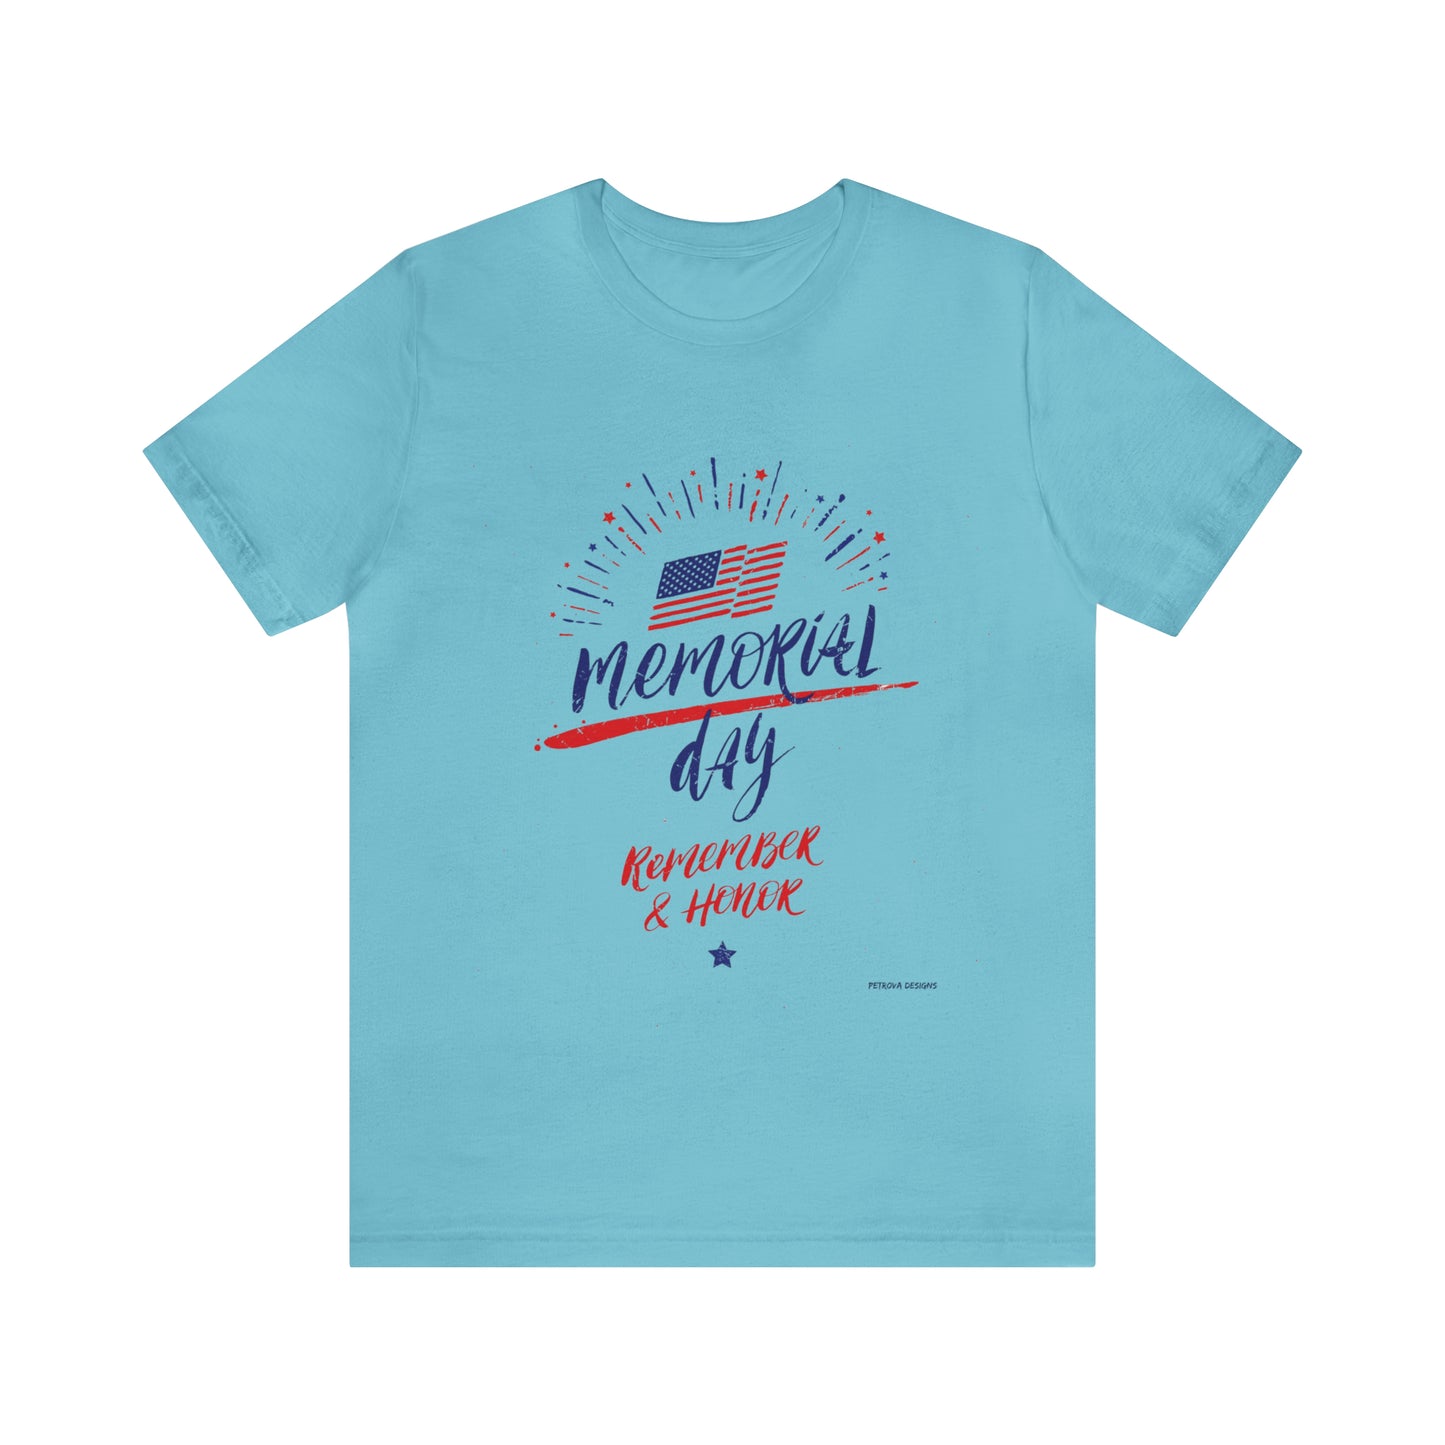 T-Shirt Tshirt Design Gift for Friend and Family Short Sleeved Shirt Memorial Day Gifts Petrova Designs